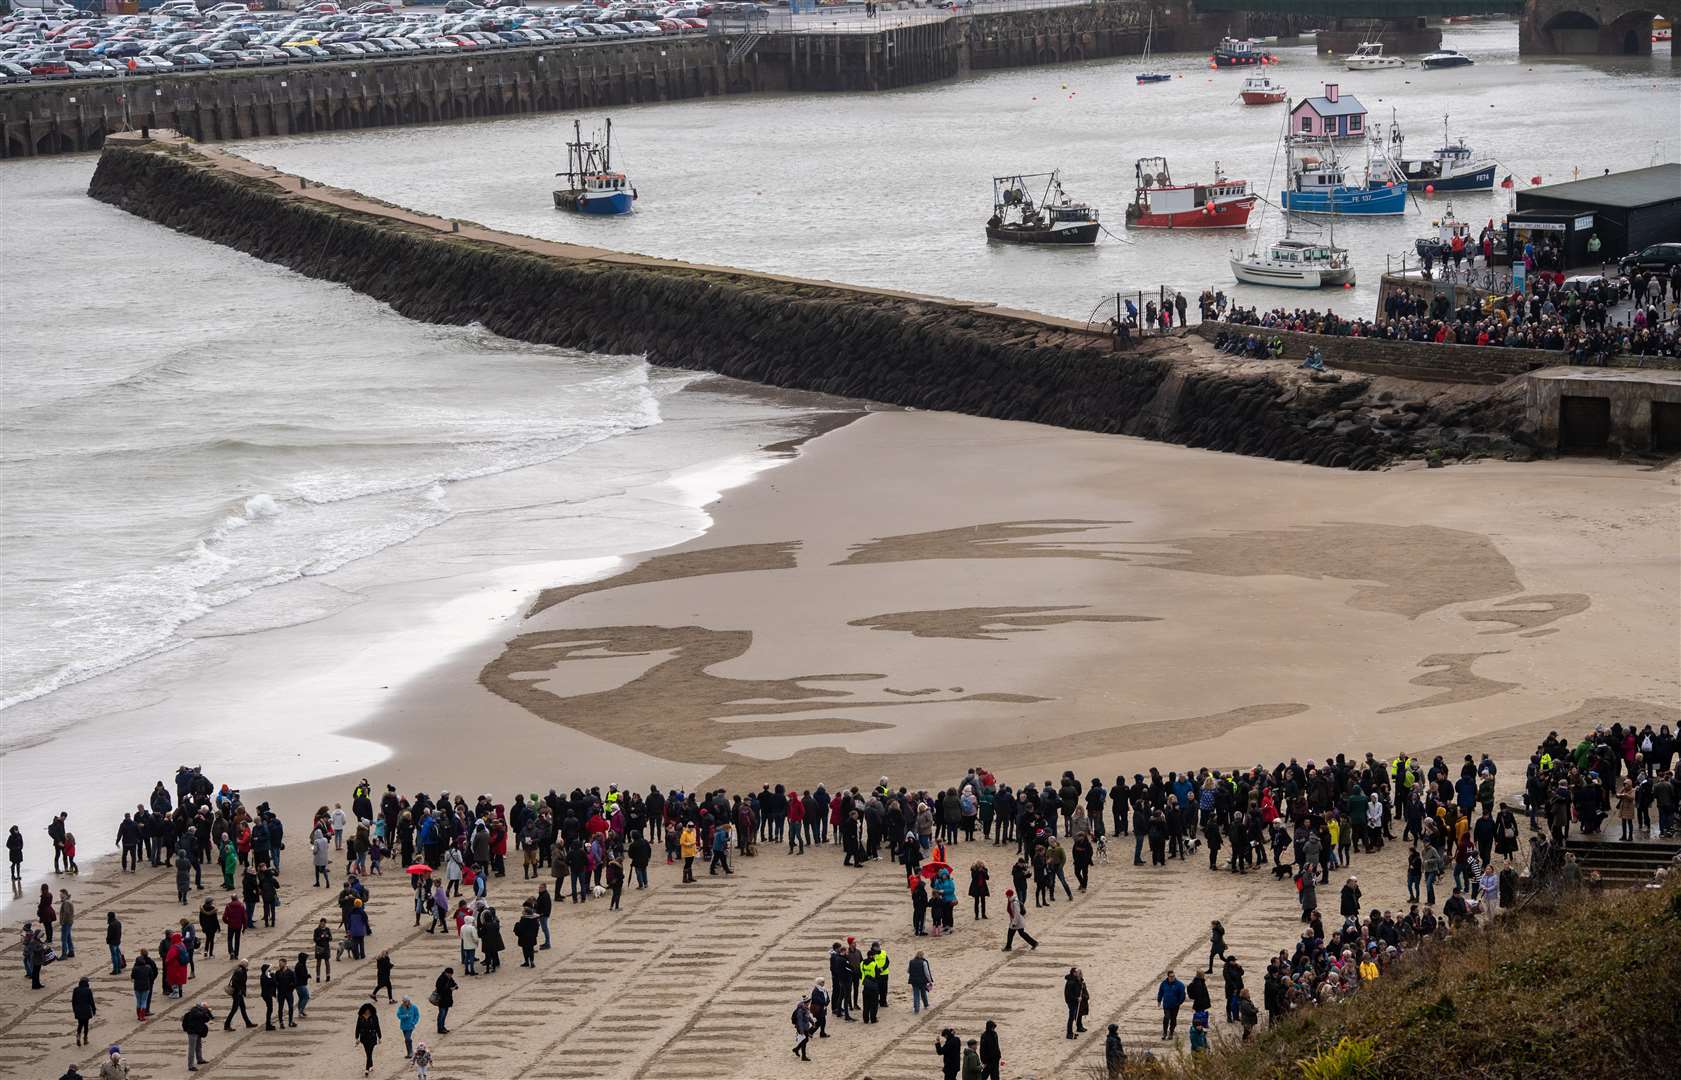 Wilfred Owen's portrait on the beach. Picture: Getty Images/ Chris J Ratcliffe